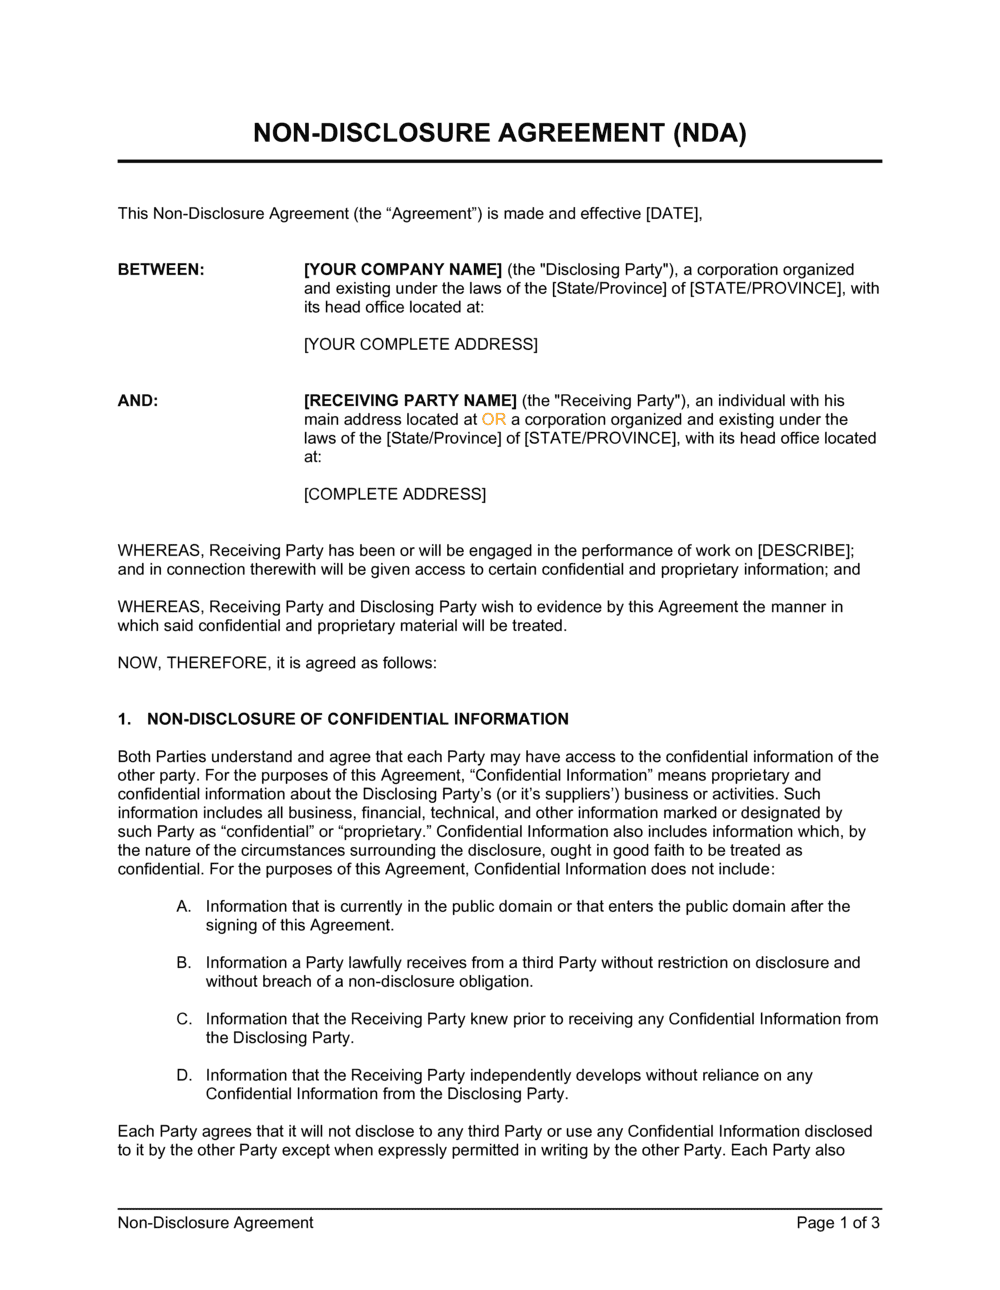 Non Disclosure Agreement Nda Template  by Business-in-a-Box™ Within word employee confidentiality agreement templates